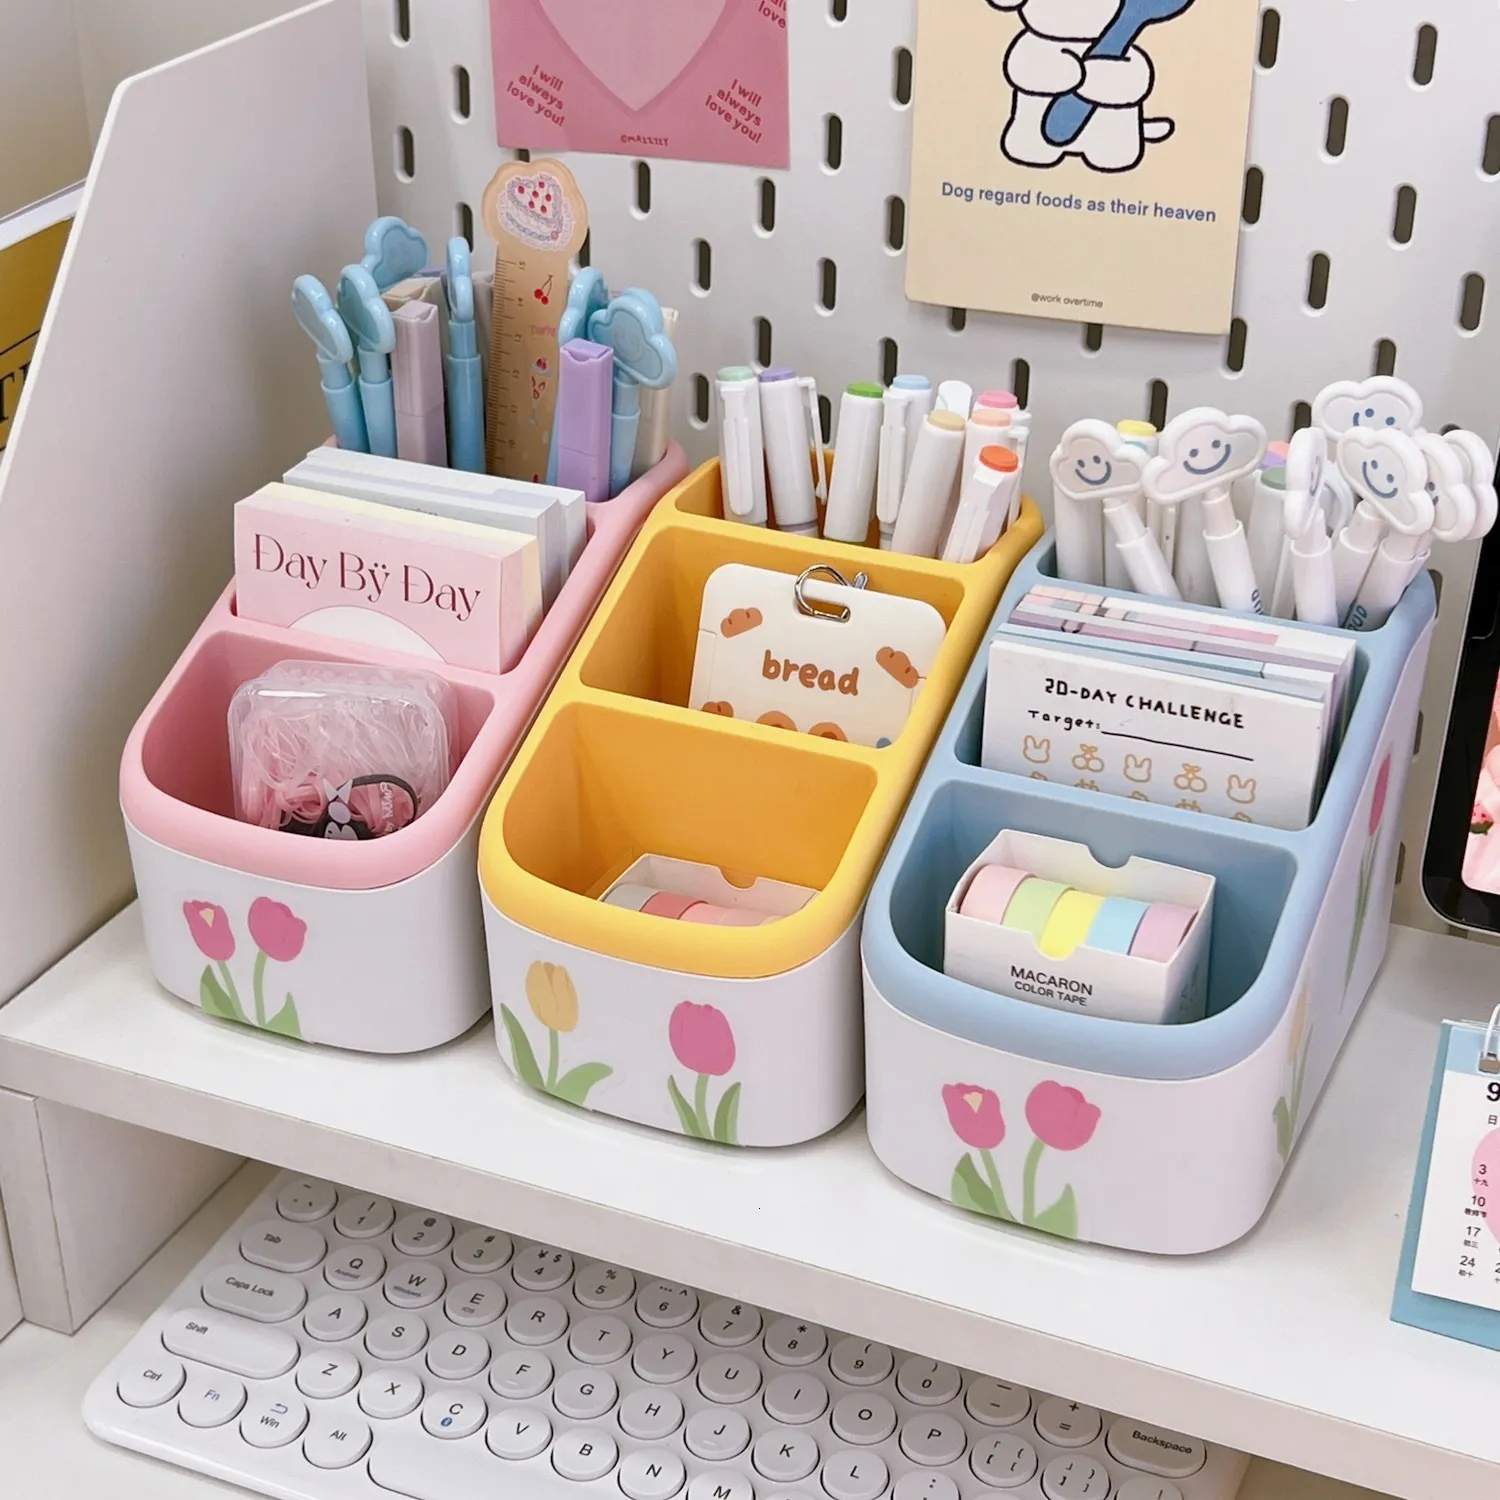 Kawaii Stationery Organizer With Large Capacity For Kids And Students Ins  Cute Ikea Plate Storage For Office And Desktop Use 230627 From Bong10,  $10.39